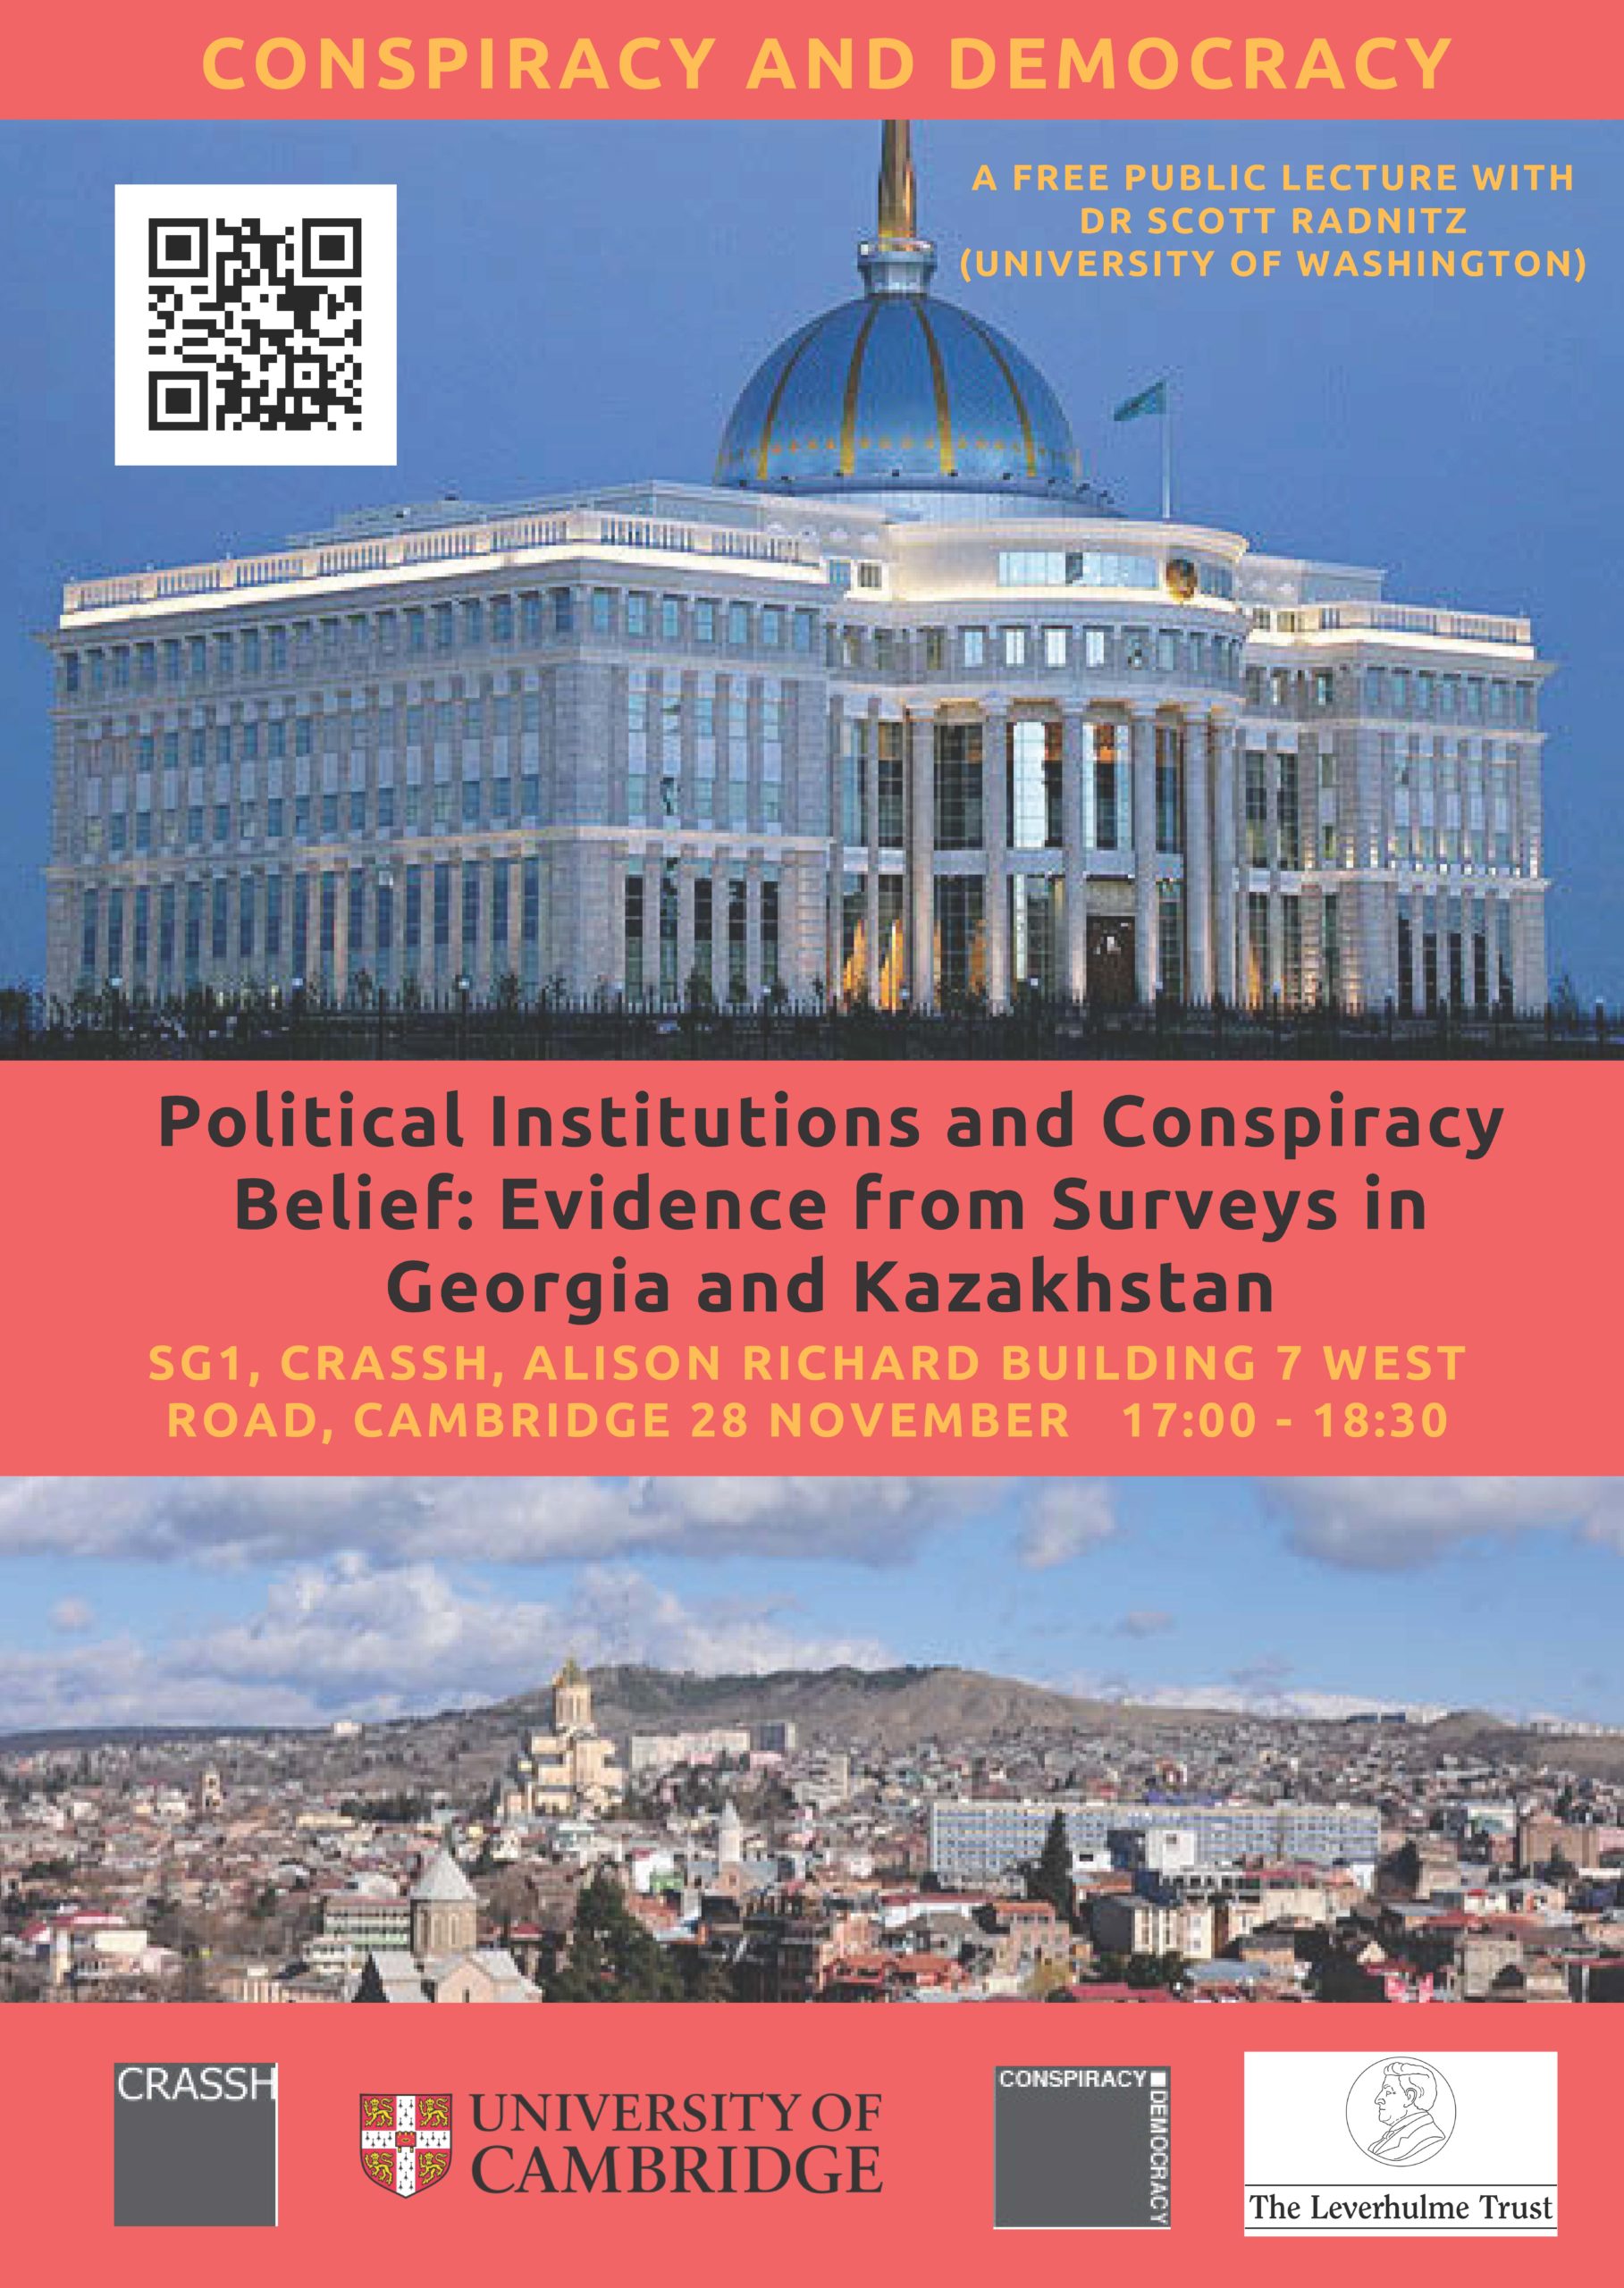 Political Institutions and Conspiracy Belief: Evidence from Surveys in Georgia and Kazakhstan